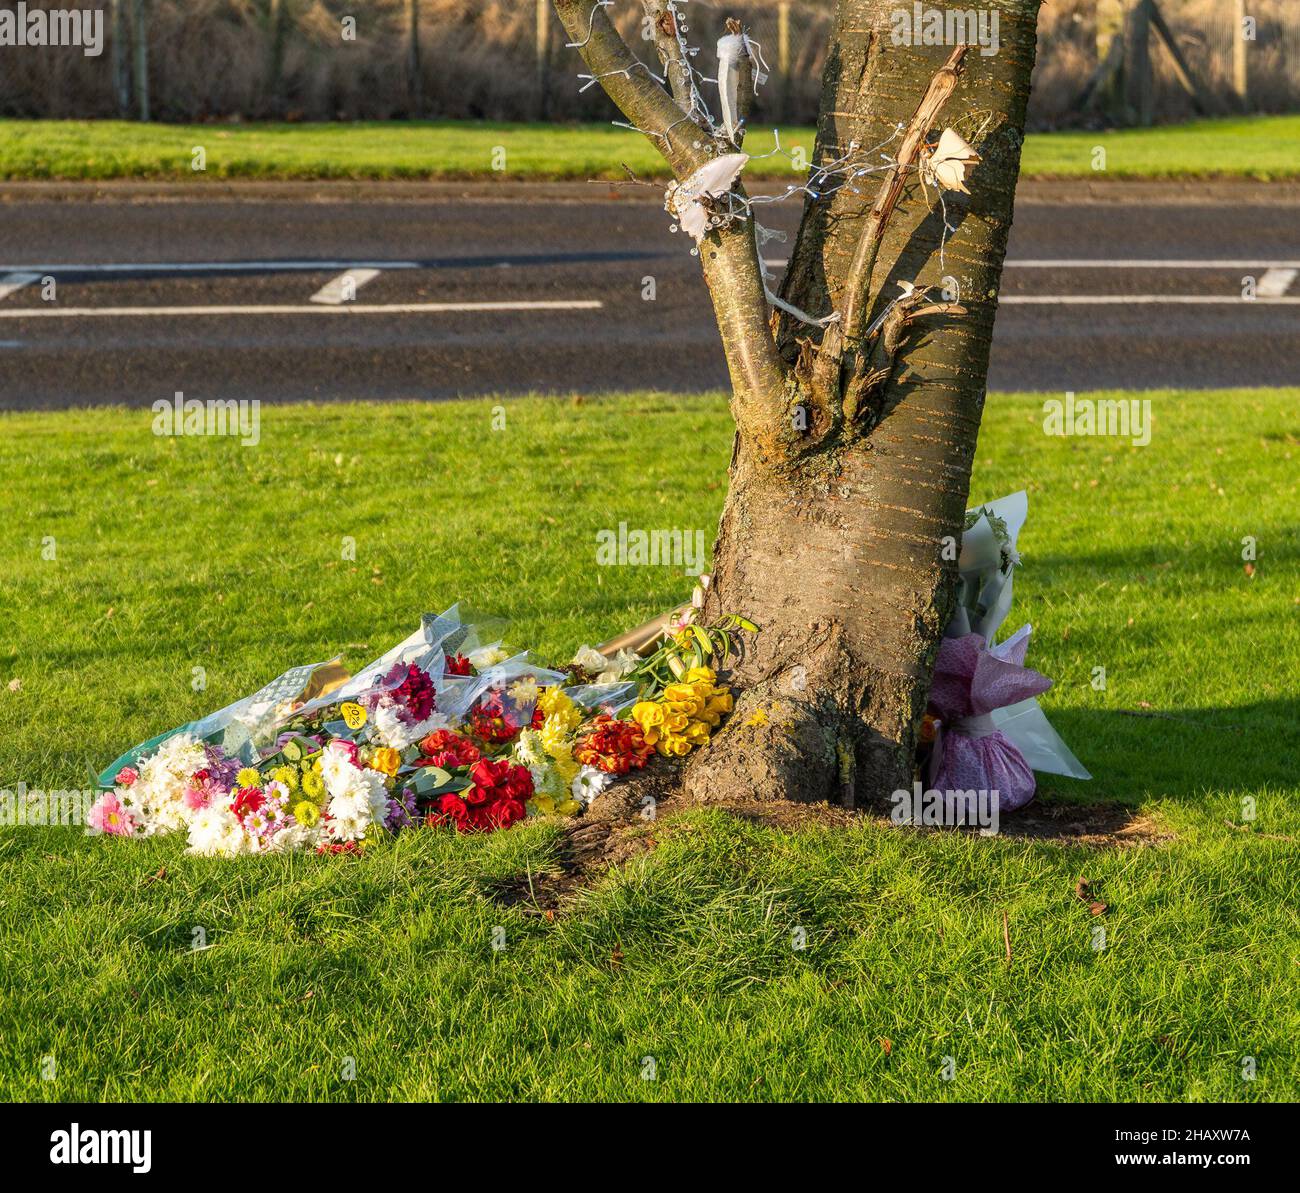 Newhame Rd, Montrose, Angus, Scotland, UK 15th of Dec 2021: Pictured - A lone tree, adjacent to the scene, becomes an area which members of public have chosen to mourn the death of the 61 year old woman that died, after she was struck by a car as she walked along the pavement. People have decorated the tree with stars, fairies, and fairy lights. The tree is surround with flowers, which contain personal messages to the woman that tragically died on the 11th of Dec 2021. Credit:Barry Nixon/Alamy Live News Stock Photo